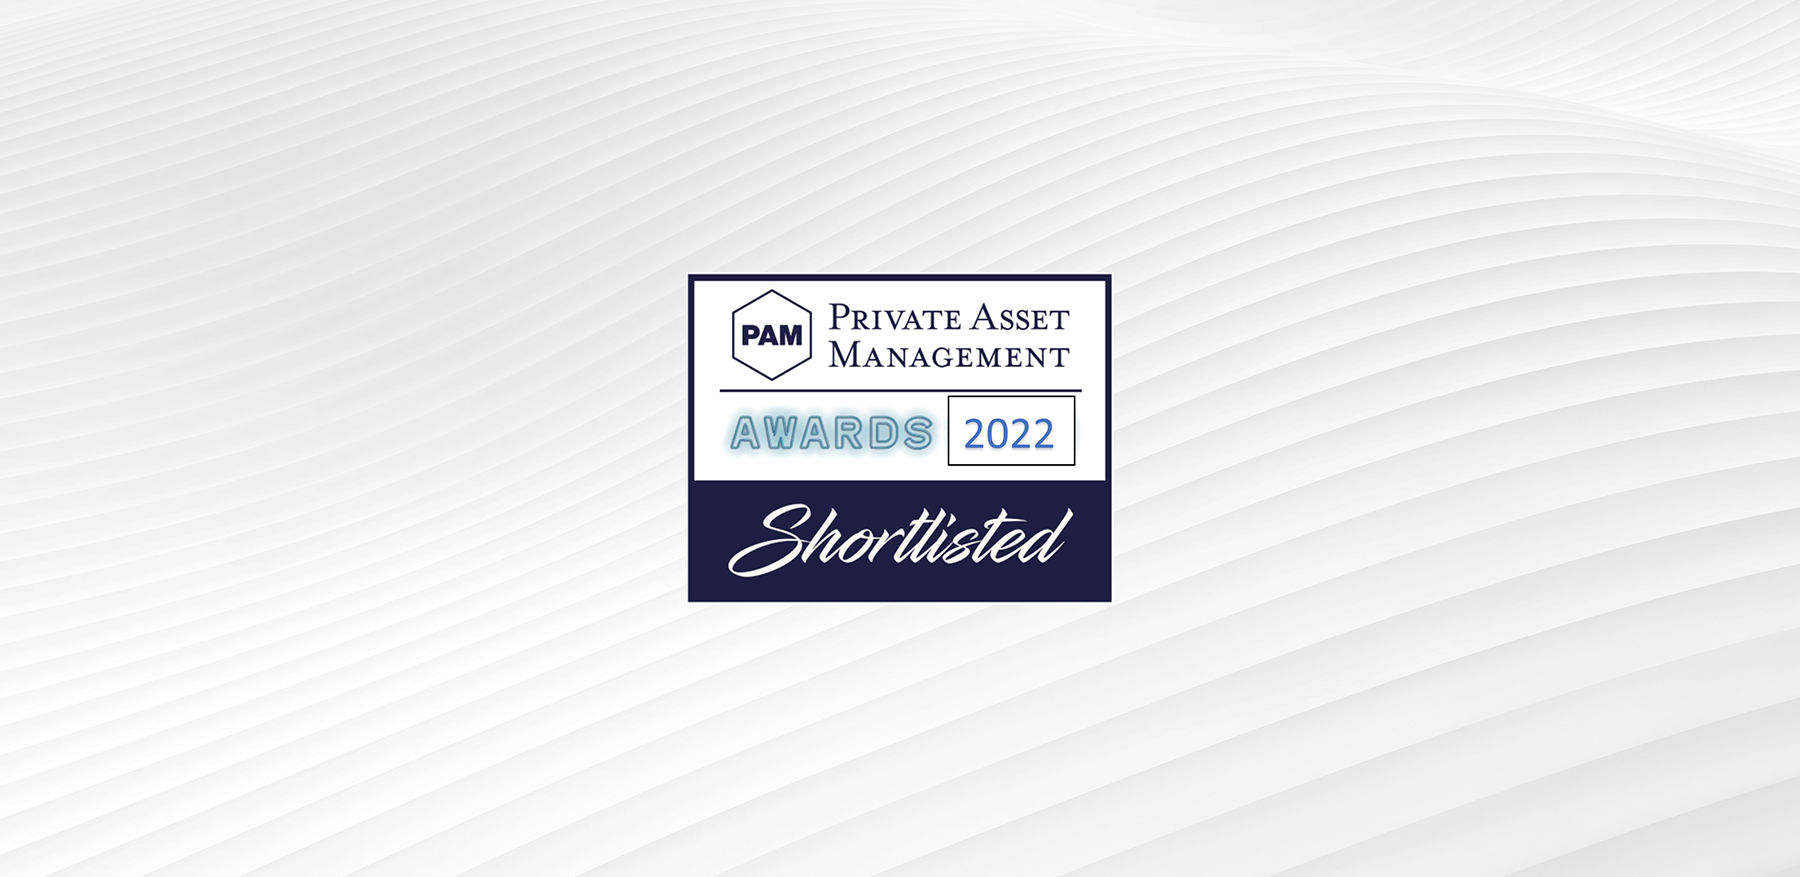 GMAG has been named as a Finalist for 2022 PAM Awards in Three Categories